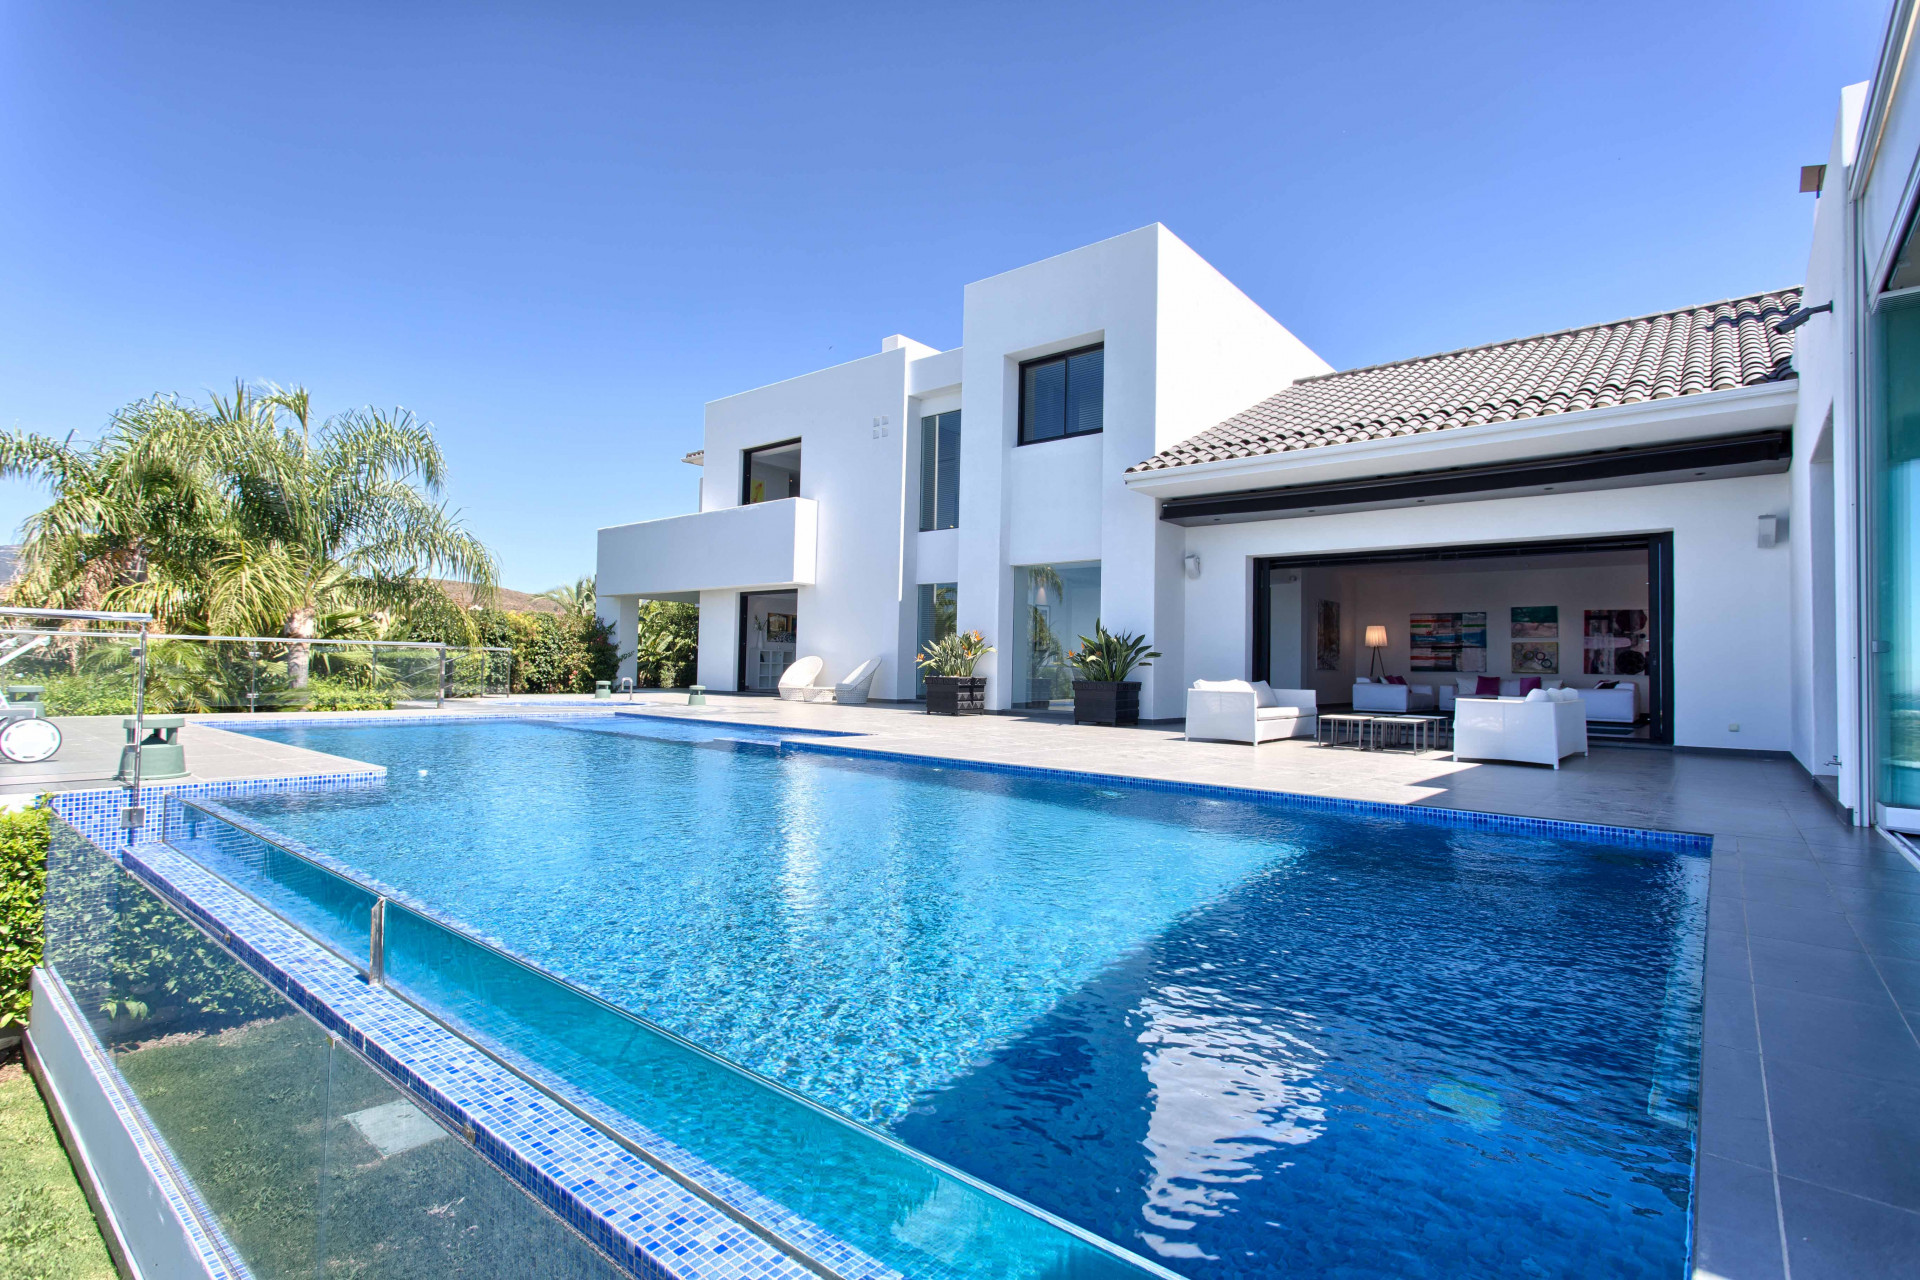 Spectacular top quality contemporary villa. South to west facing with panoramic views to the Mediterranean and the coastline. Built to the highest standards.